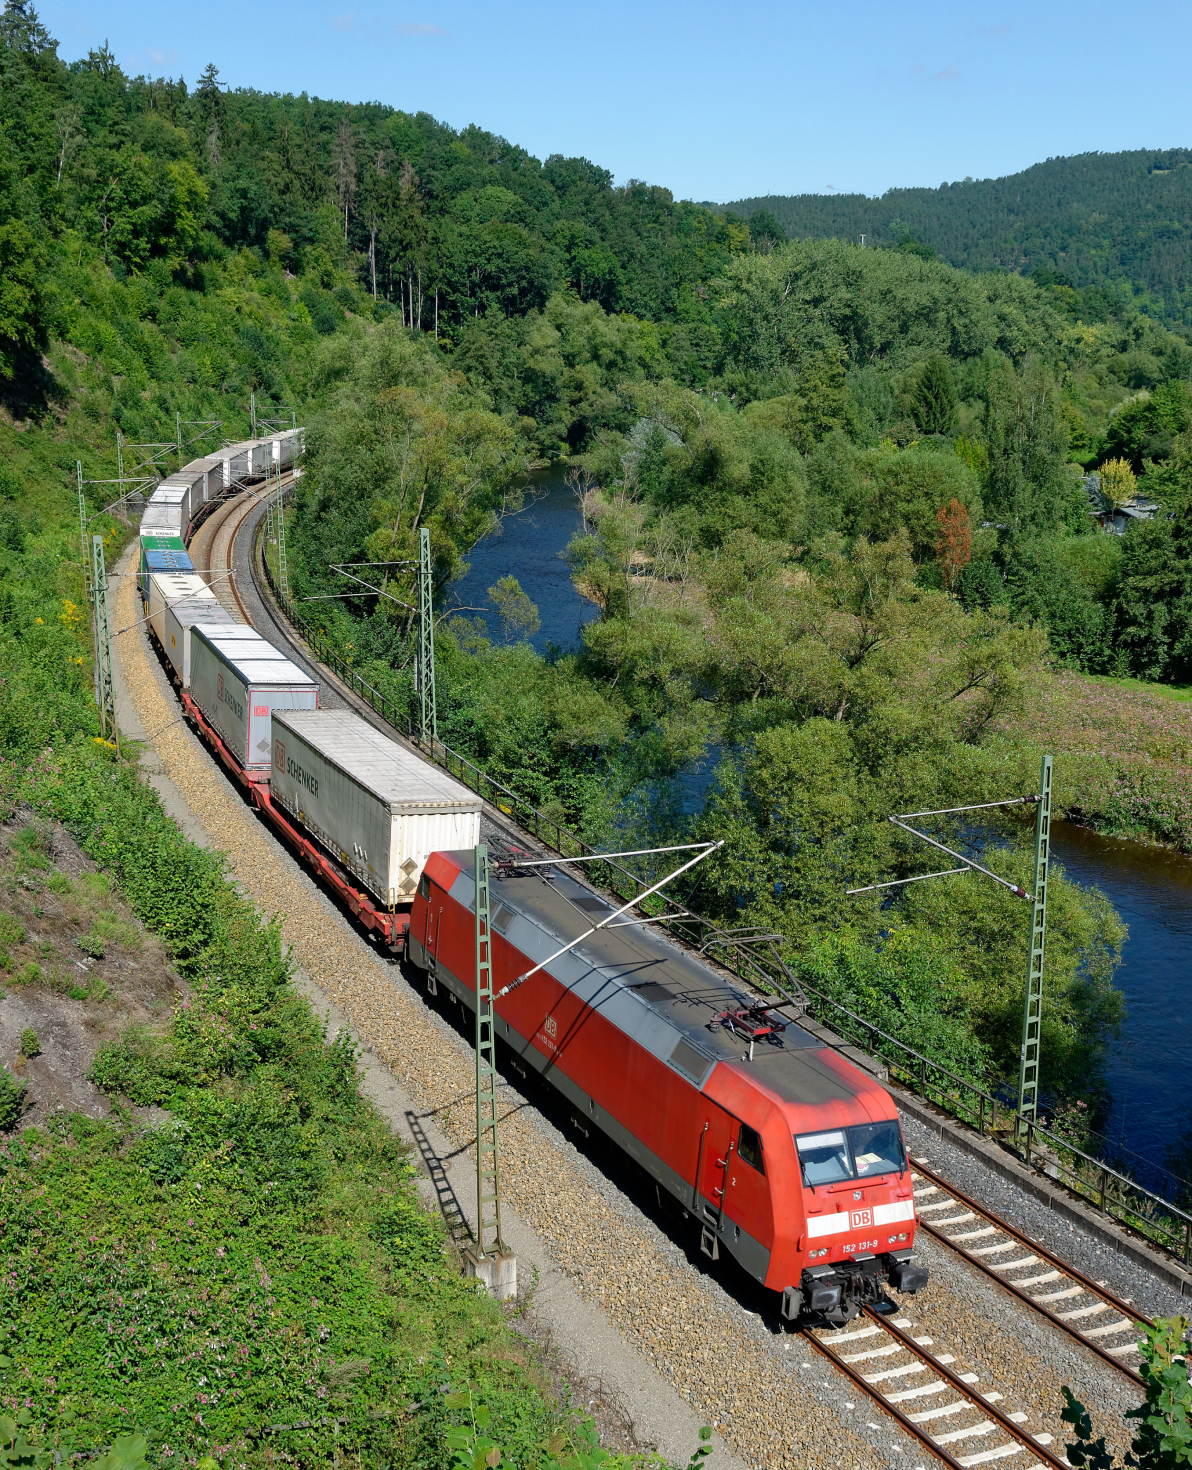 On a clear day, a lengthy red freight train, travels through a lush green landscape. The scenery consists of forested areas along the edges and a blue river.